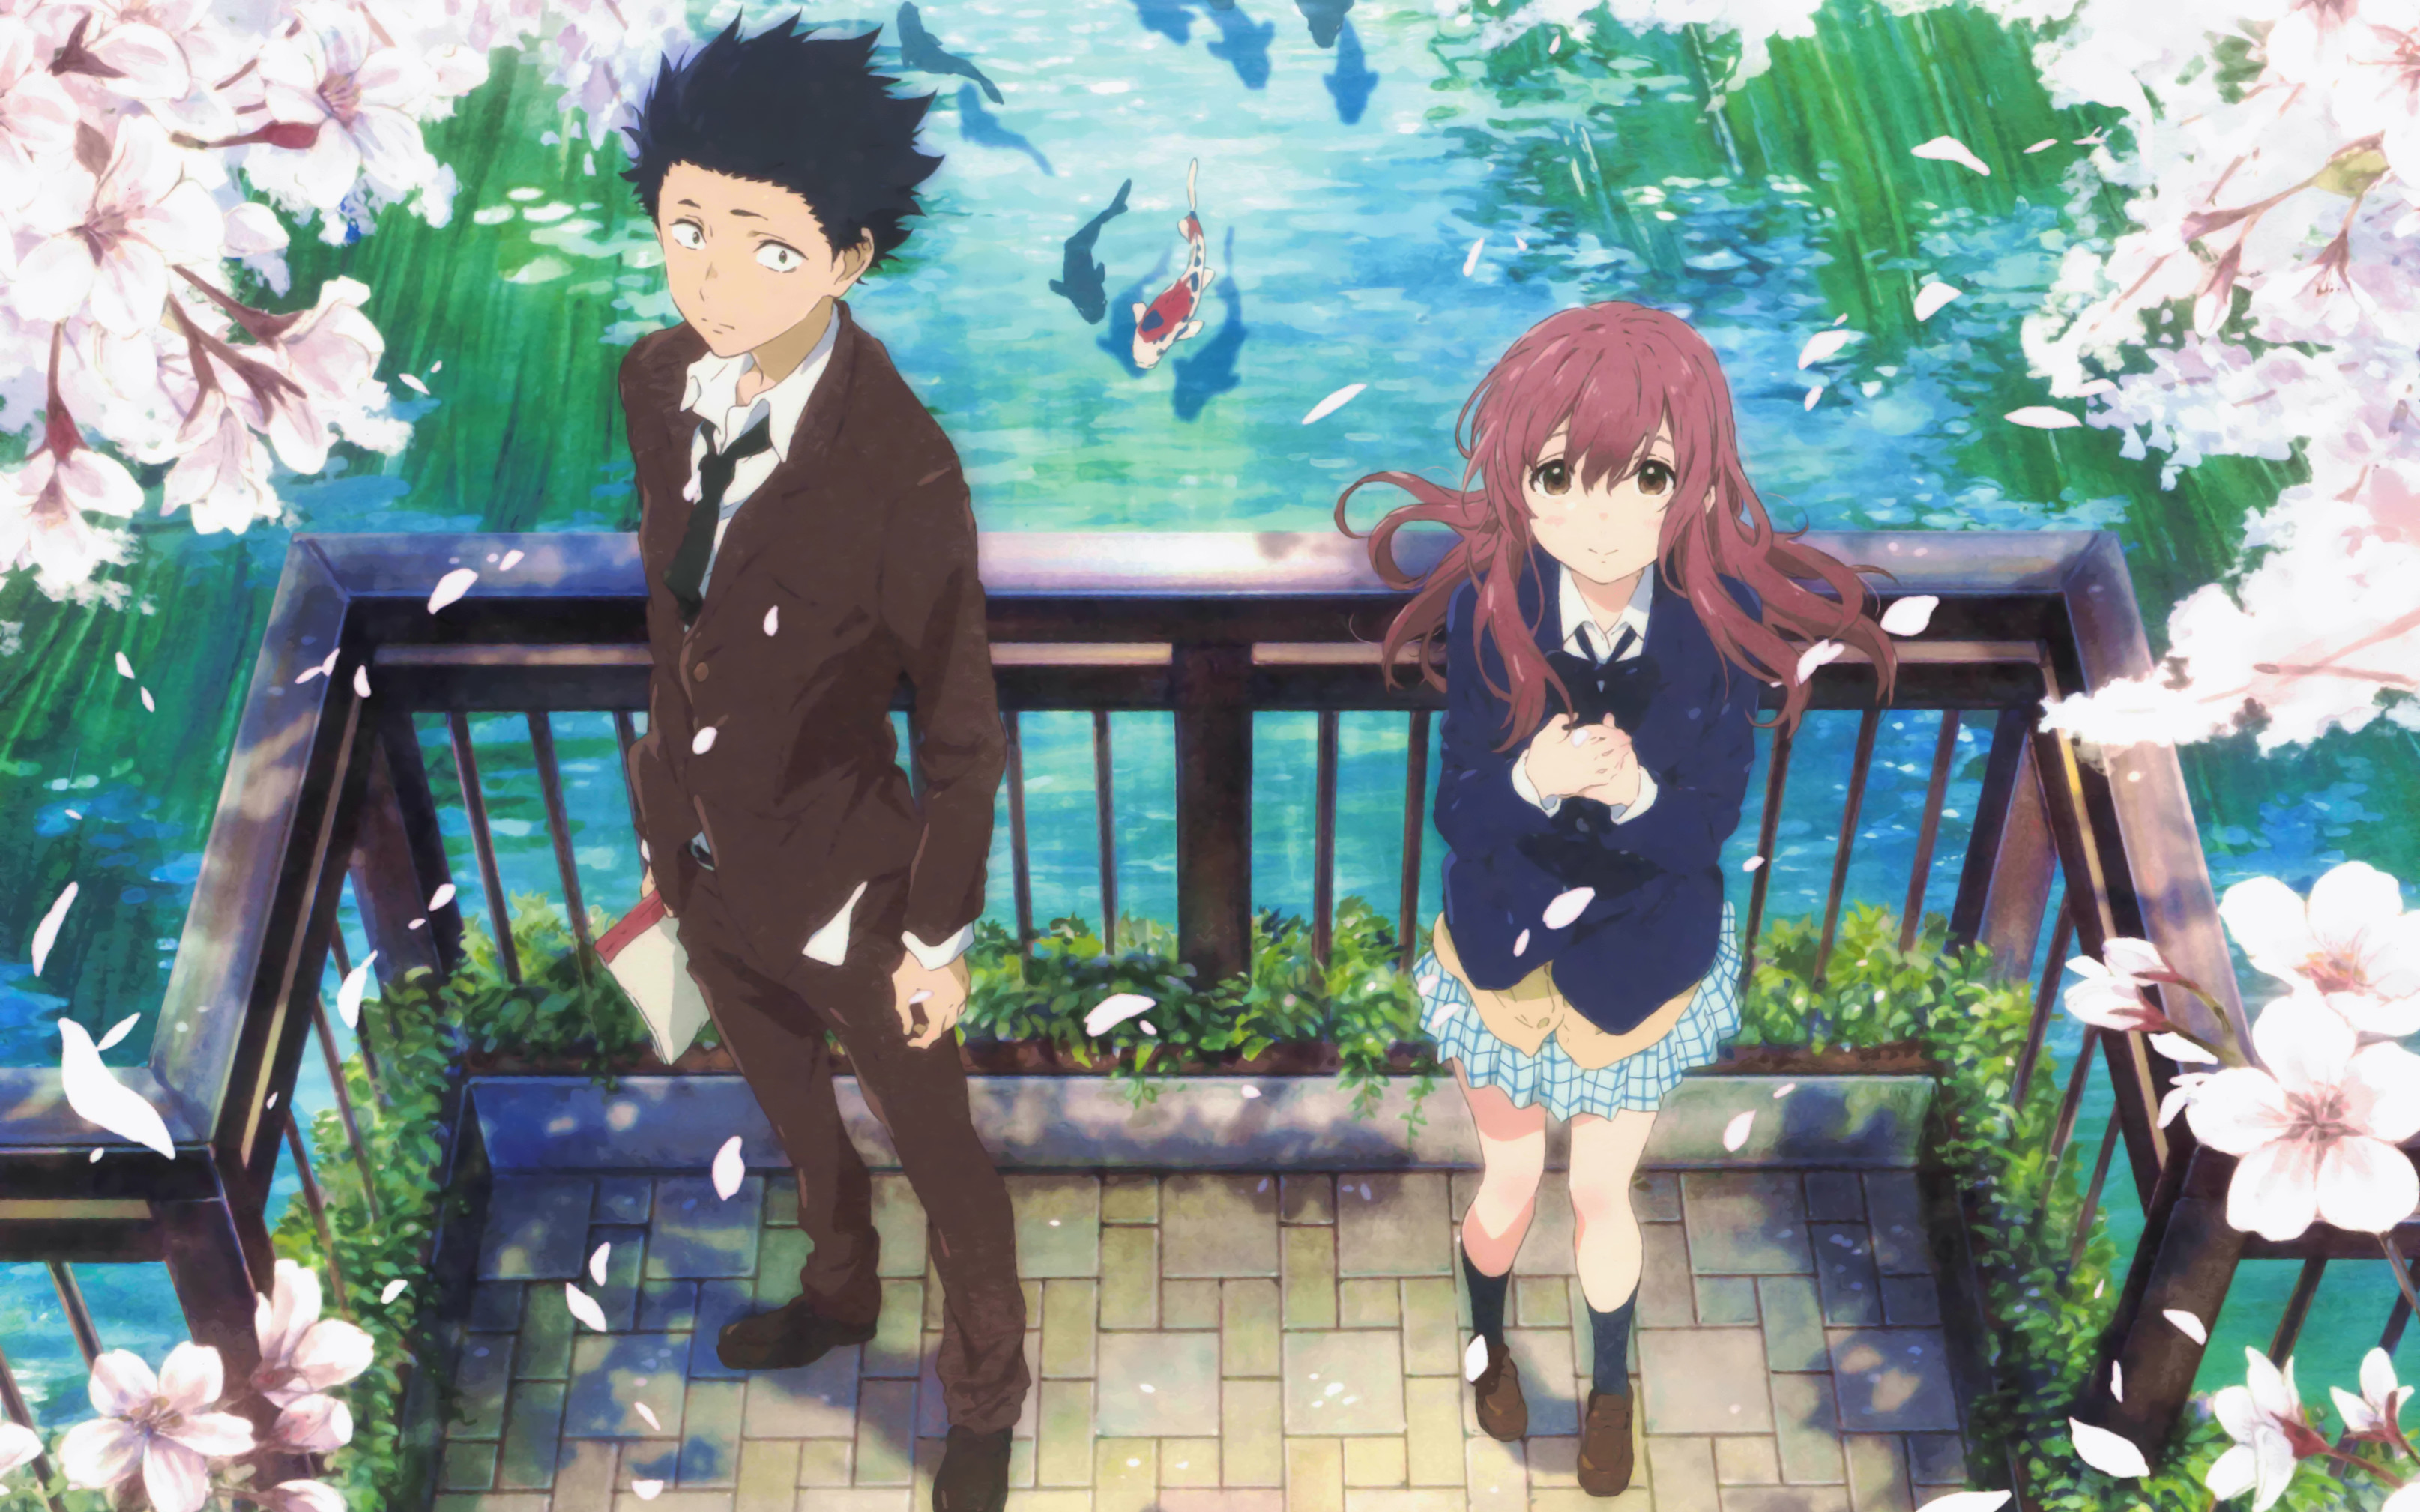 [39+] A Silent Voice Wallpapers on WallpaperSafari